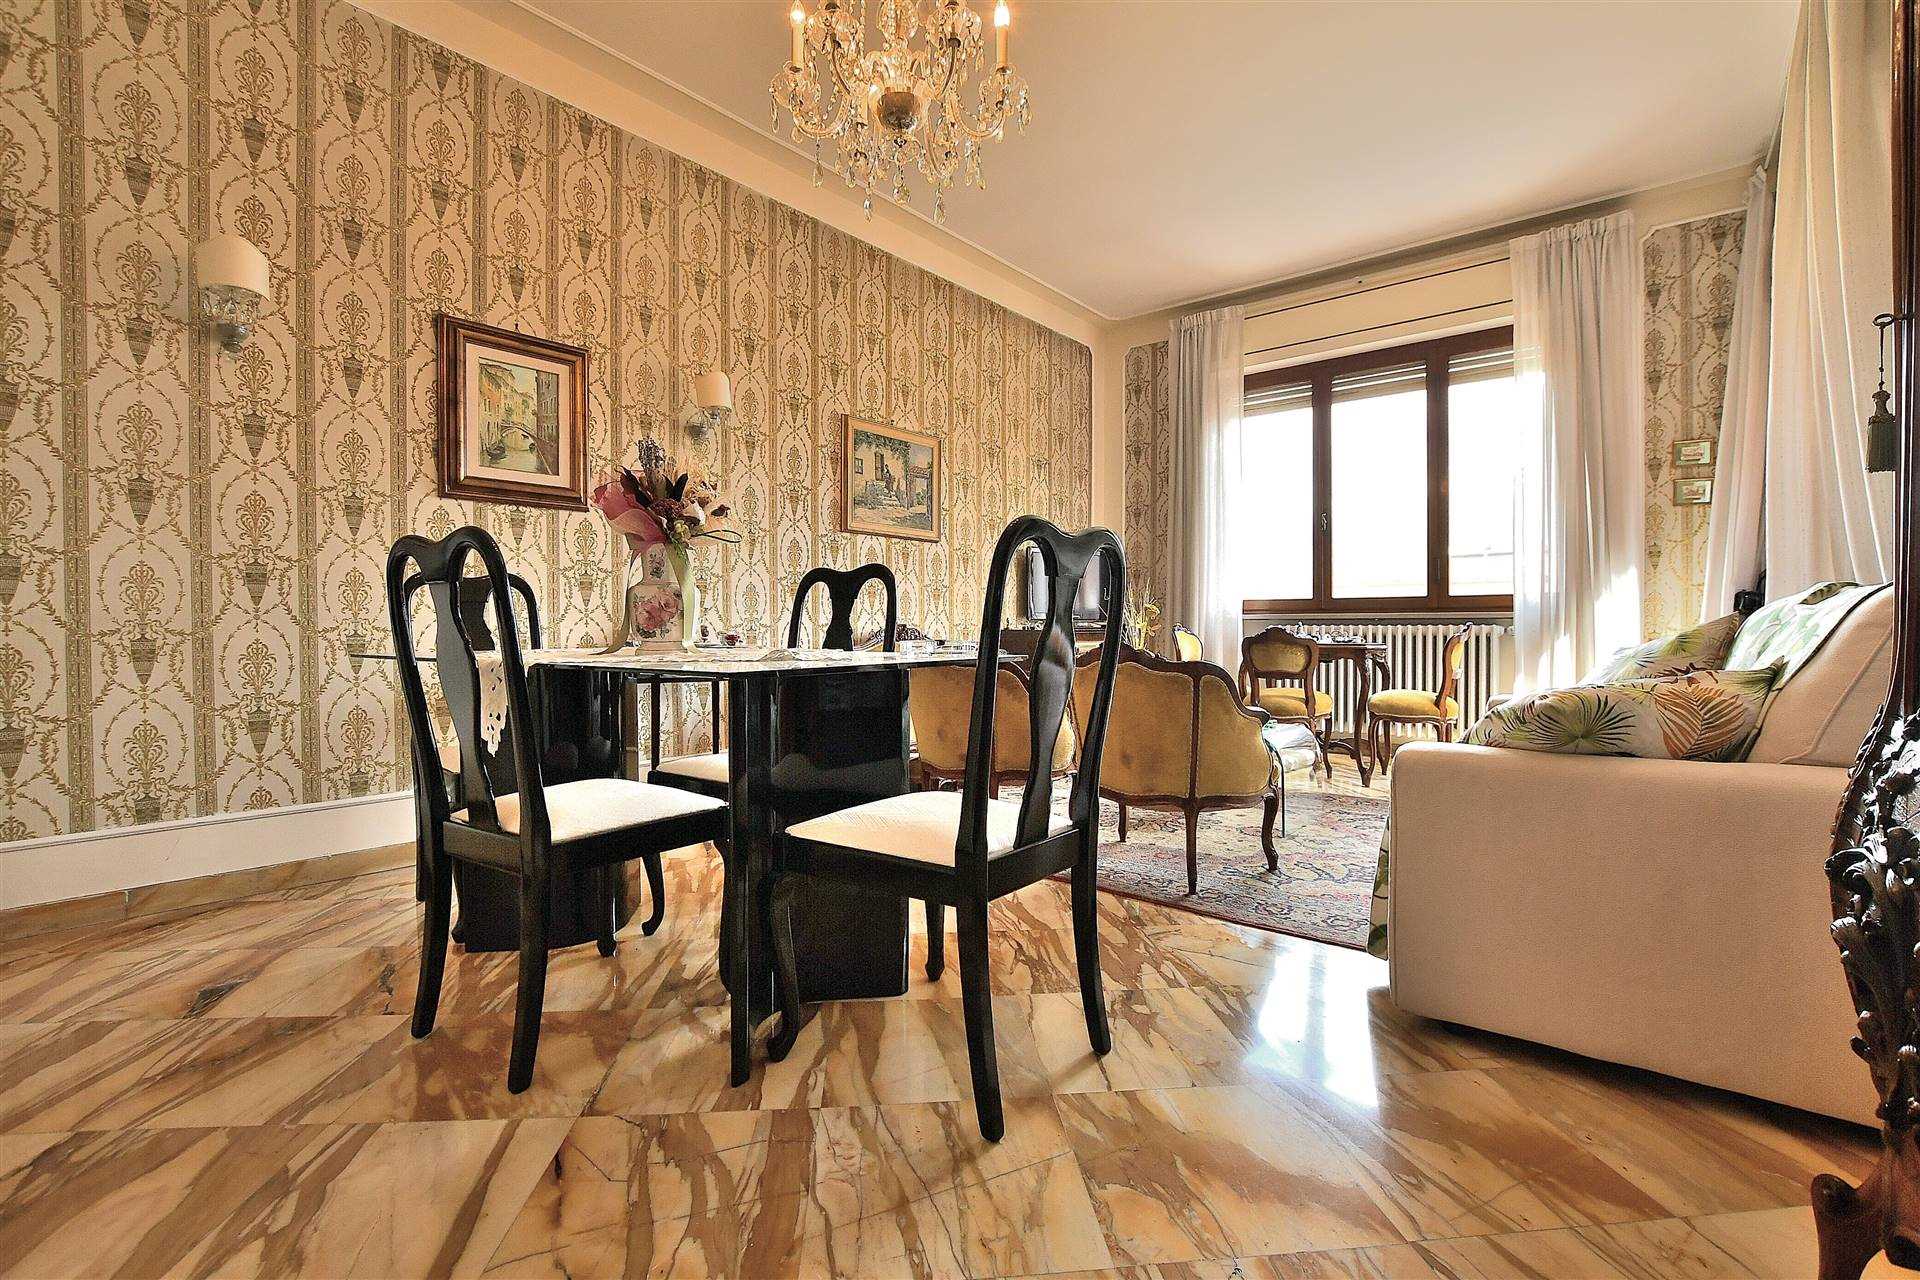 MAZZINI, SIENA, Apartment for sale of 114 Sq. mt., Habitable, Heating Centralized, Energetic class: G, Epi: 175 kwh/m2 year, placed at 2° on 2, composed by: 4 Rooms, Separate kitchen, , 2 Bedrooms, 1 